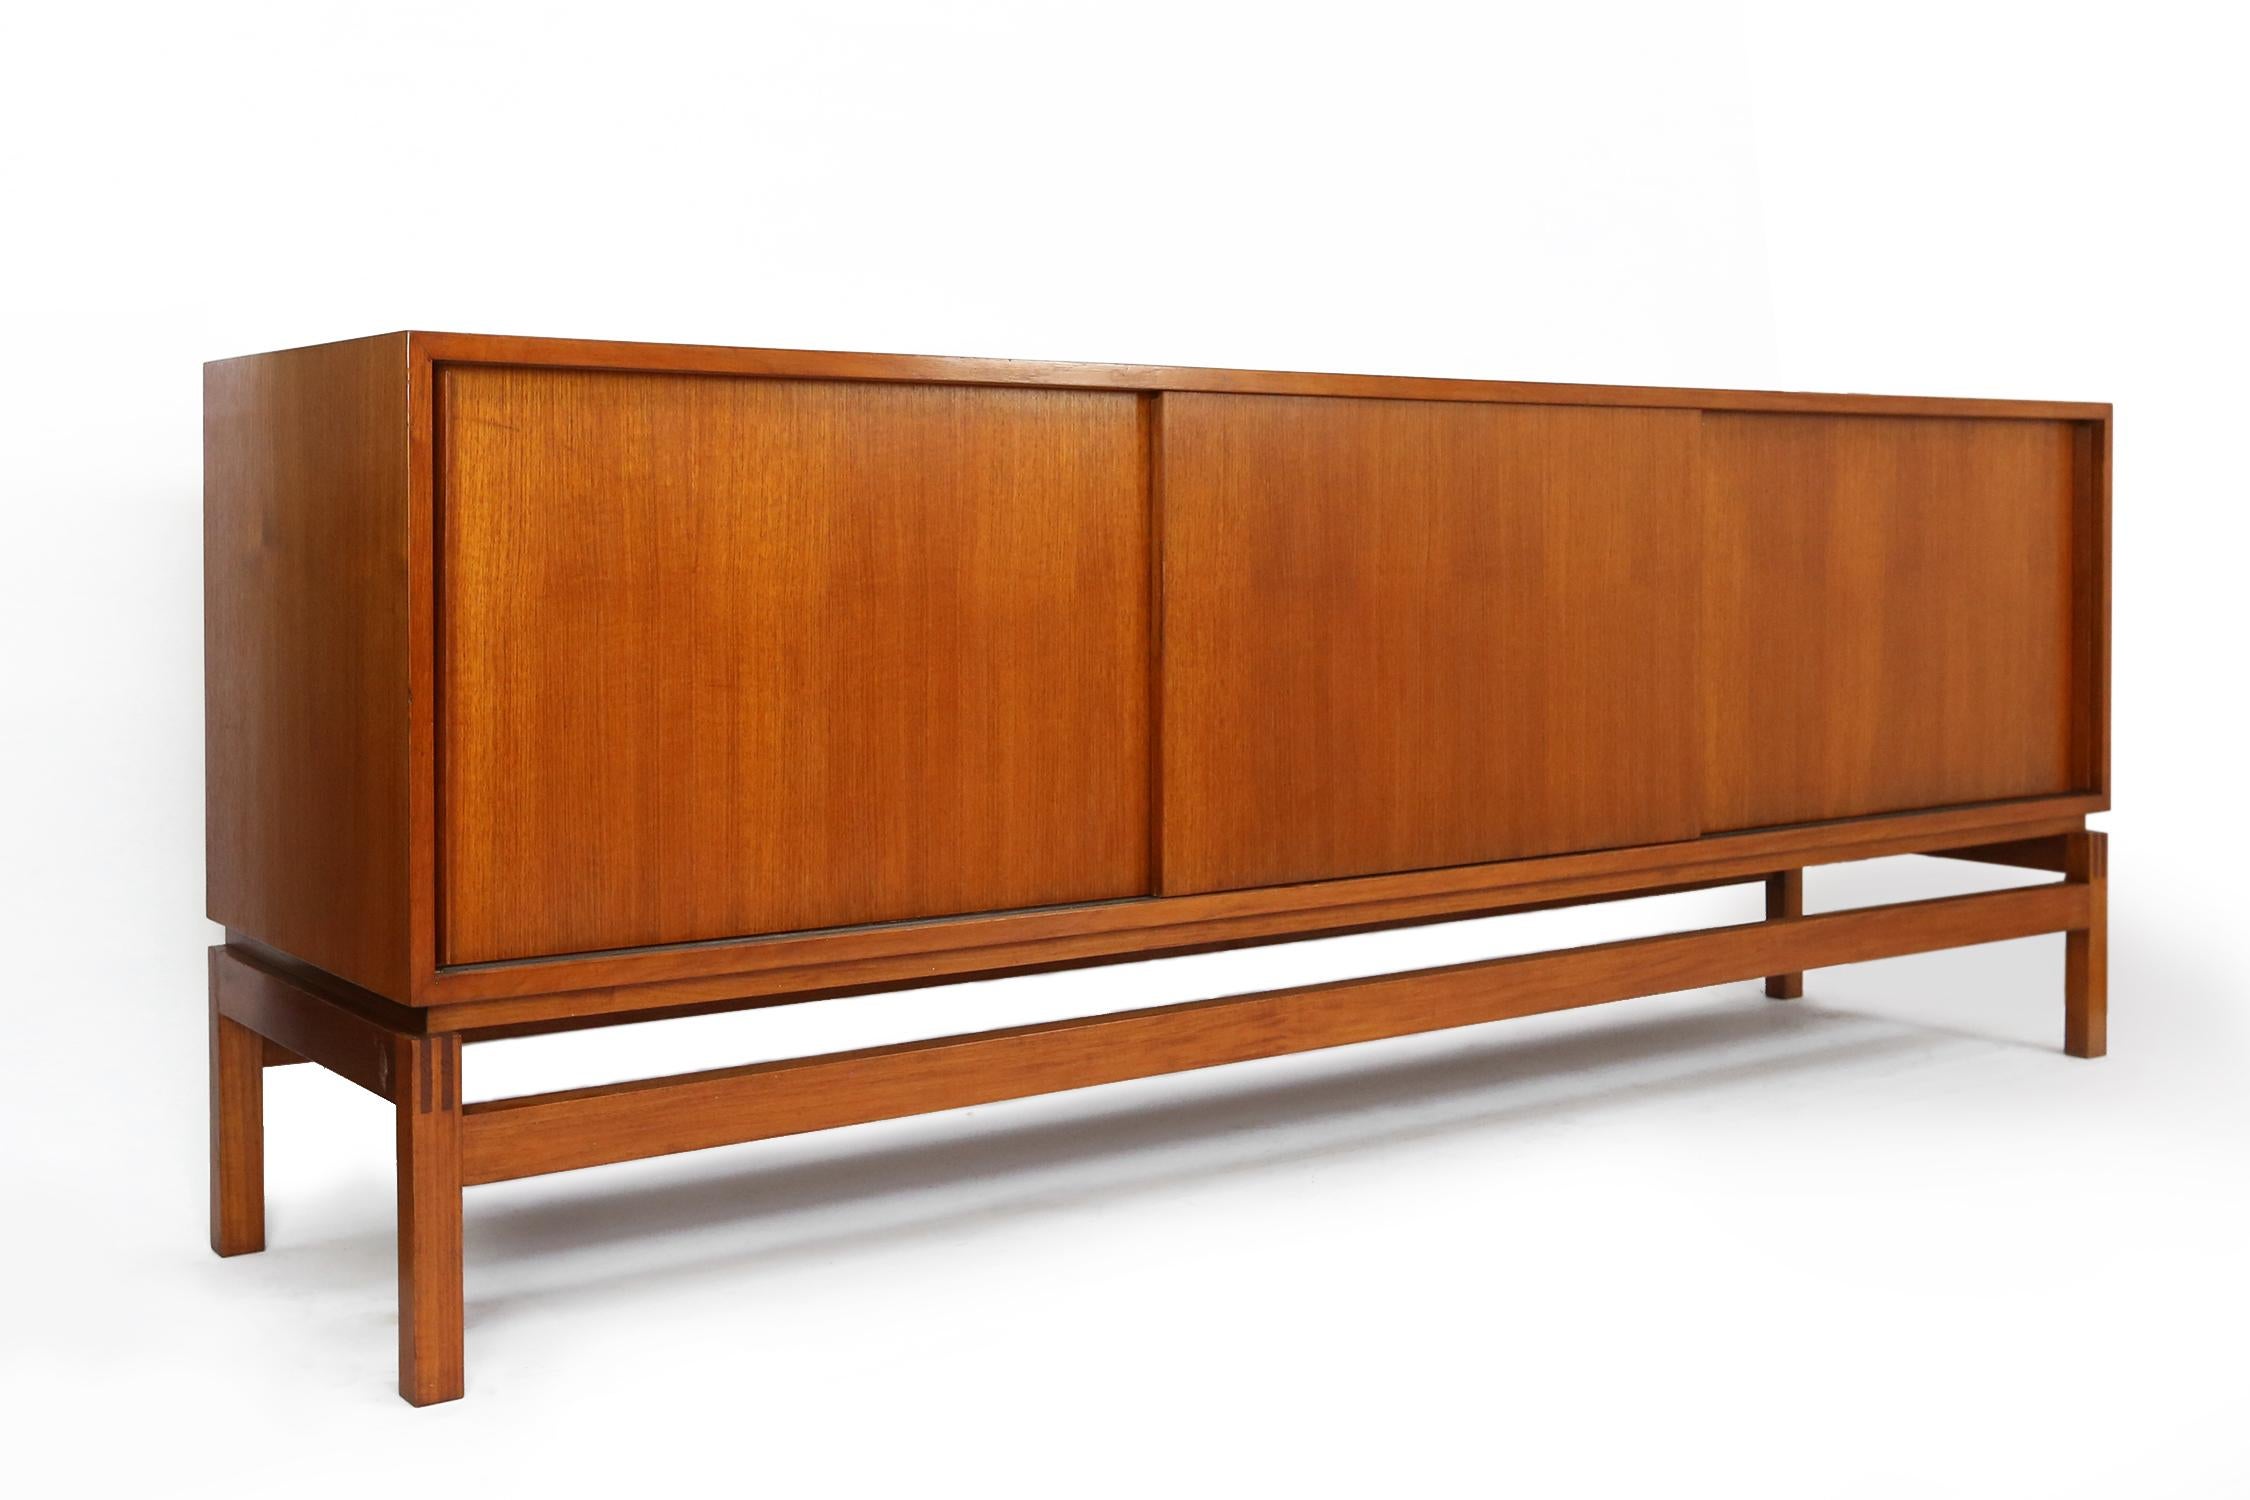 Monumental sideboard by Emiel Veranneman, Belgium designer in the 1970s. This exclusive cabinet was made in solid teak wood and is very rare to find. Floating in an elegant shaped wooden frame gives a light feeling to this large storage piece. Both